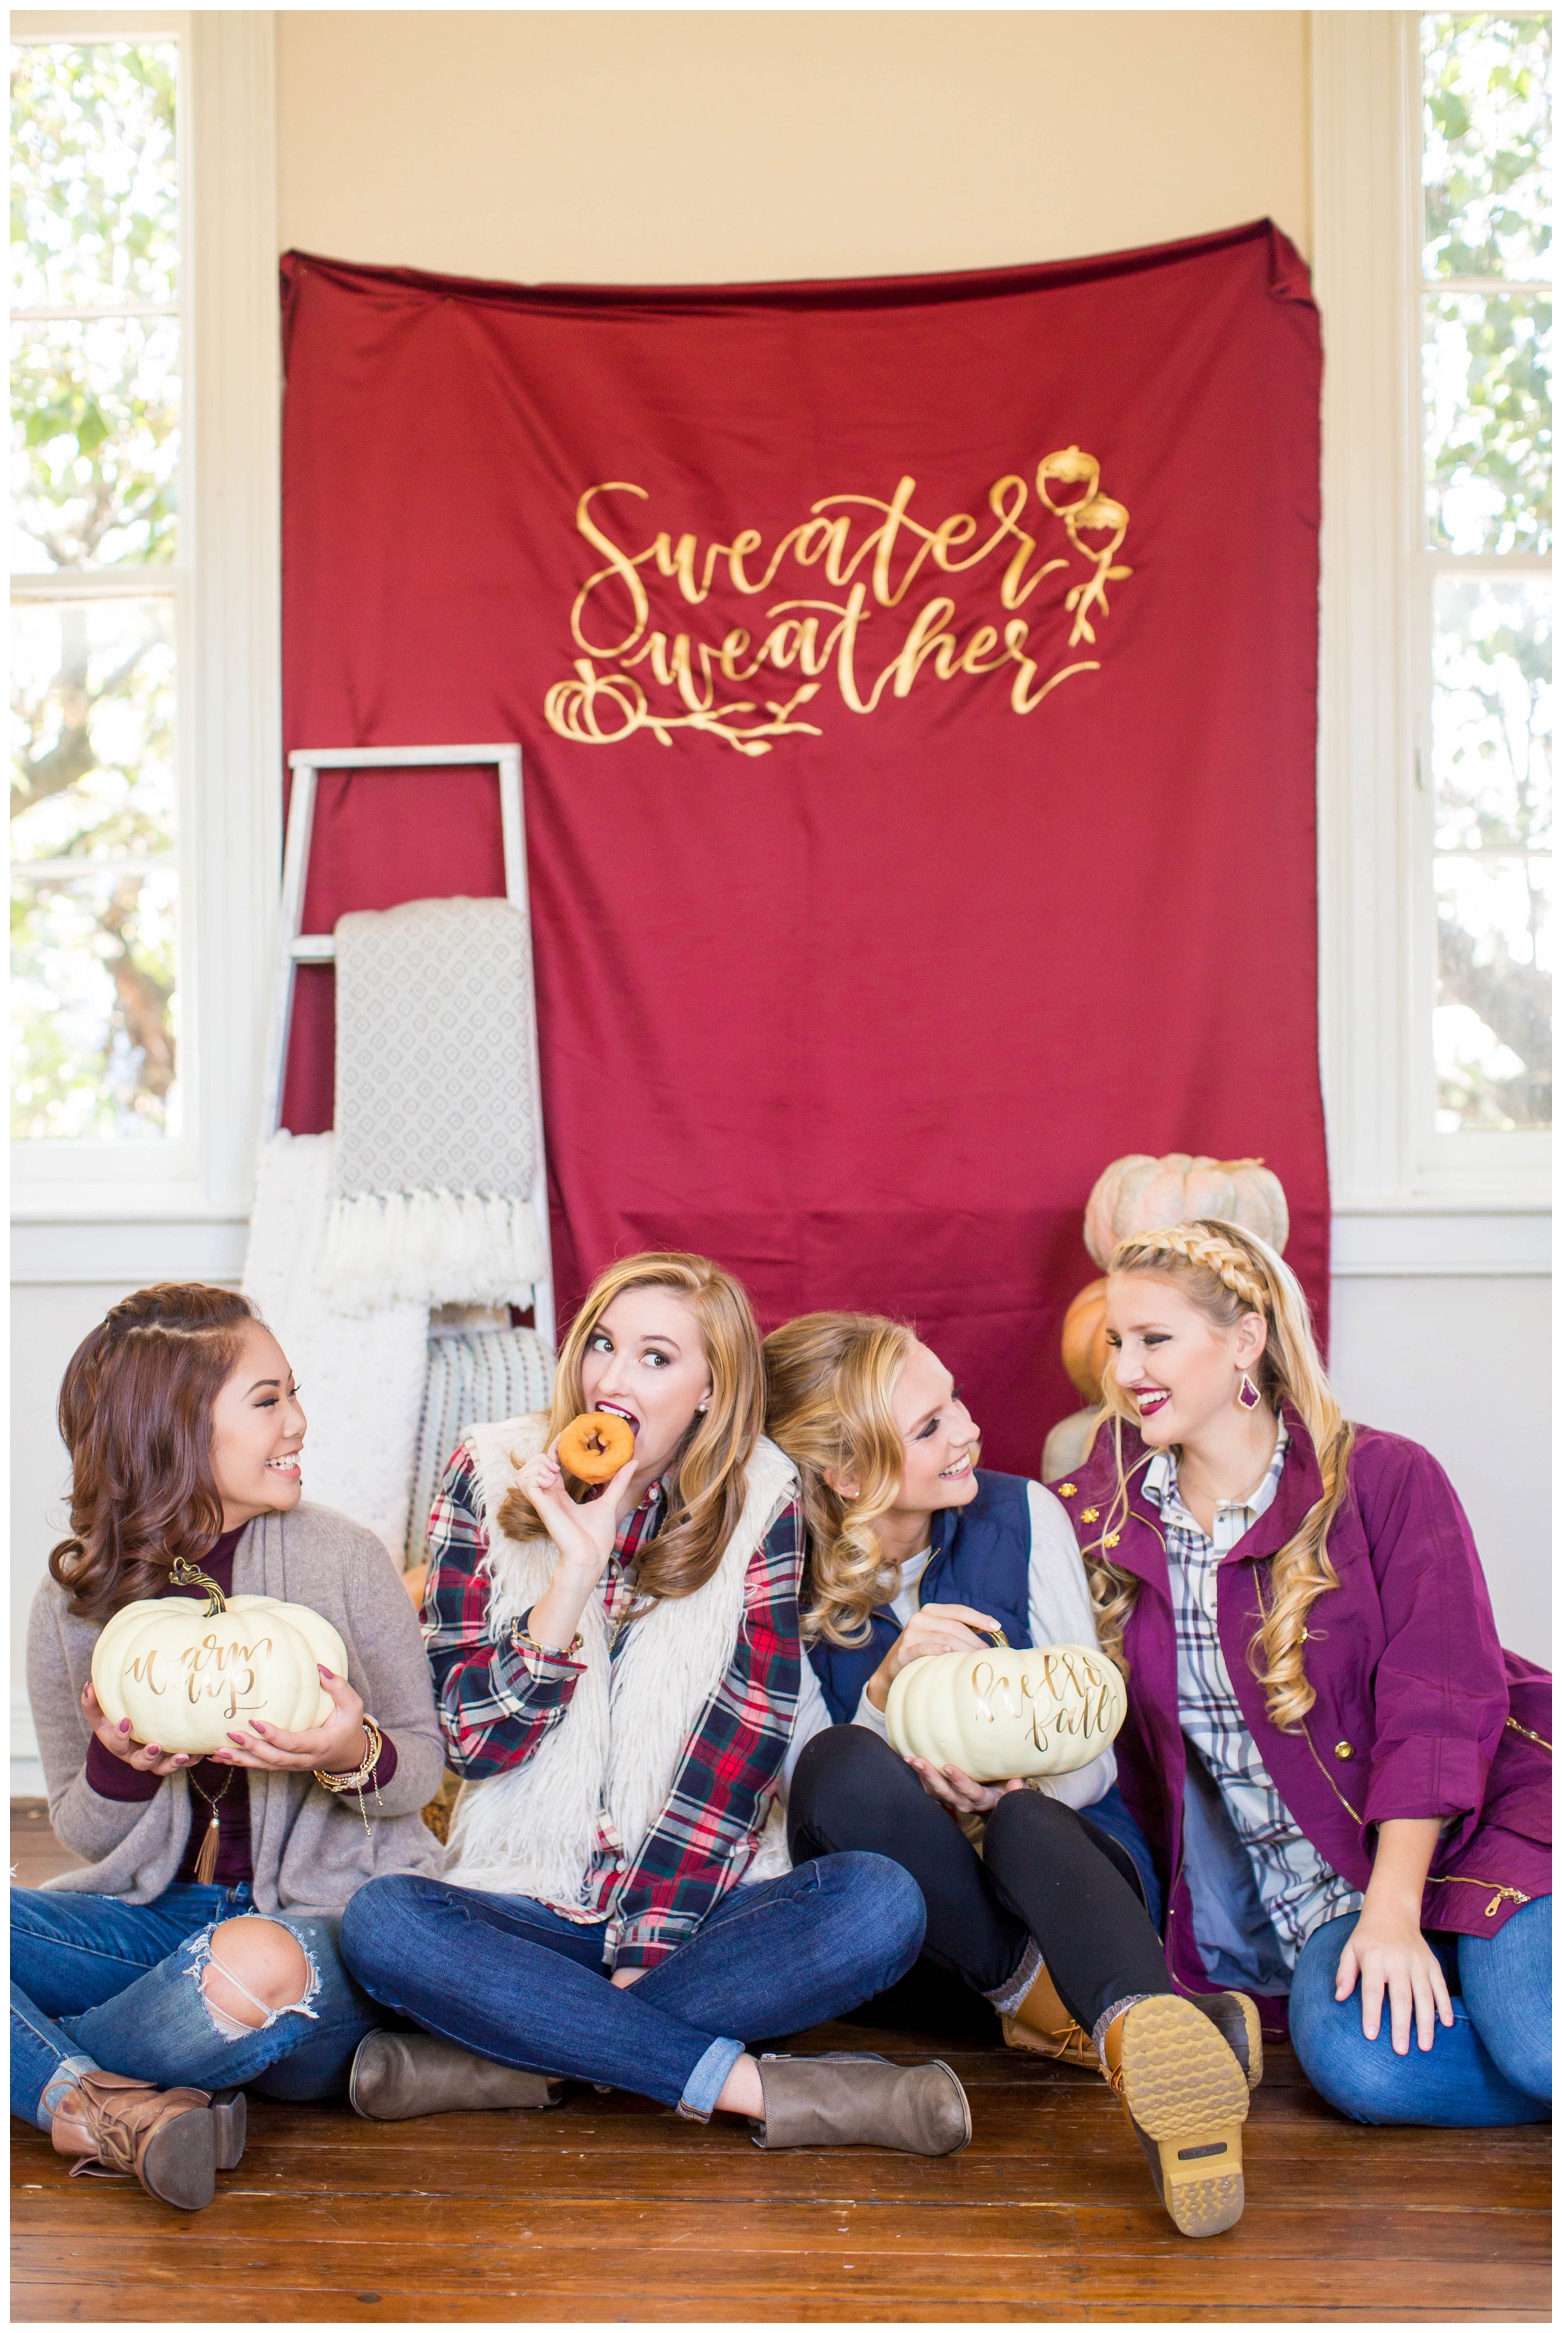 View More: http://hopetaylorphotographyphotos.pass.us/sweater-weather-styled-shoot